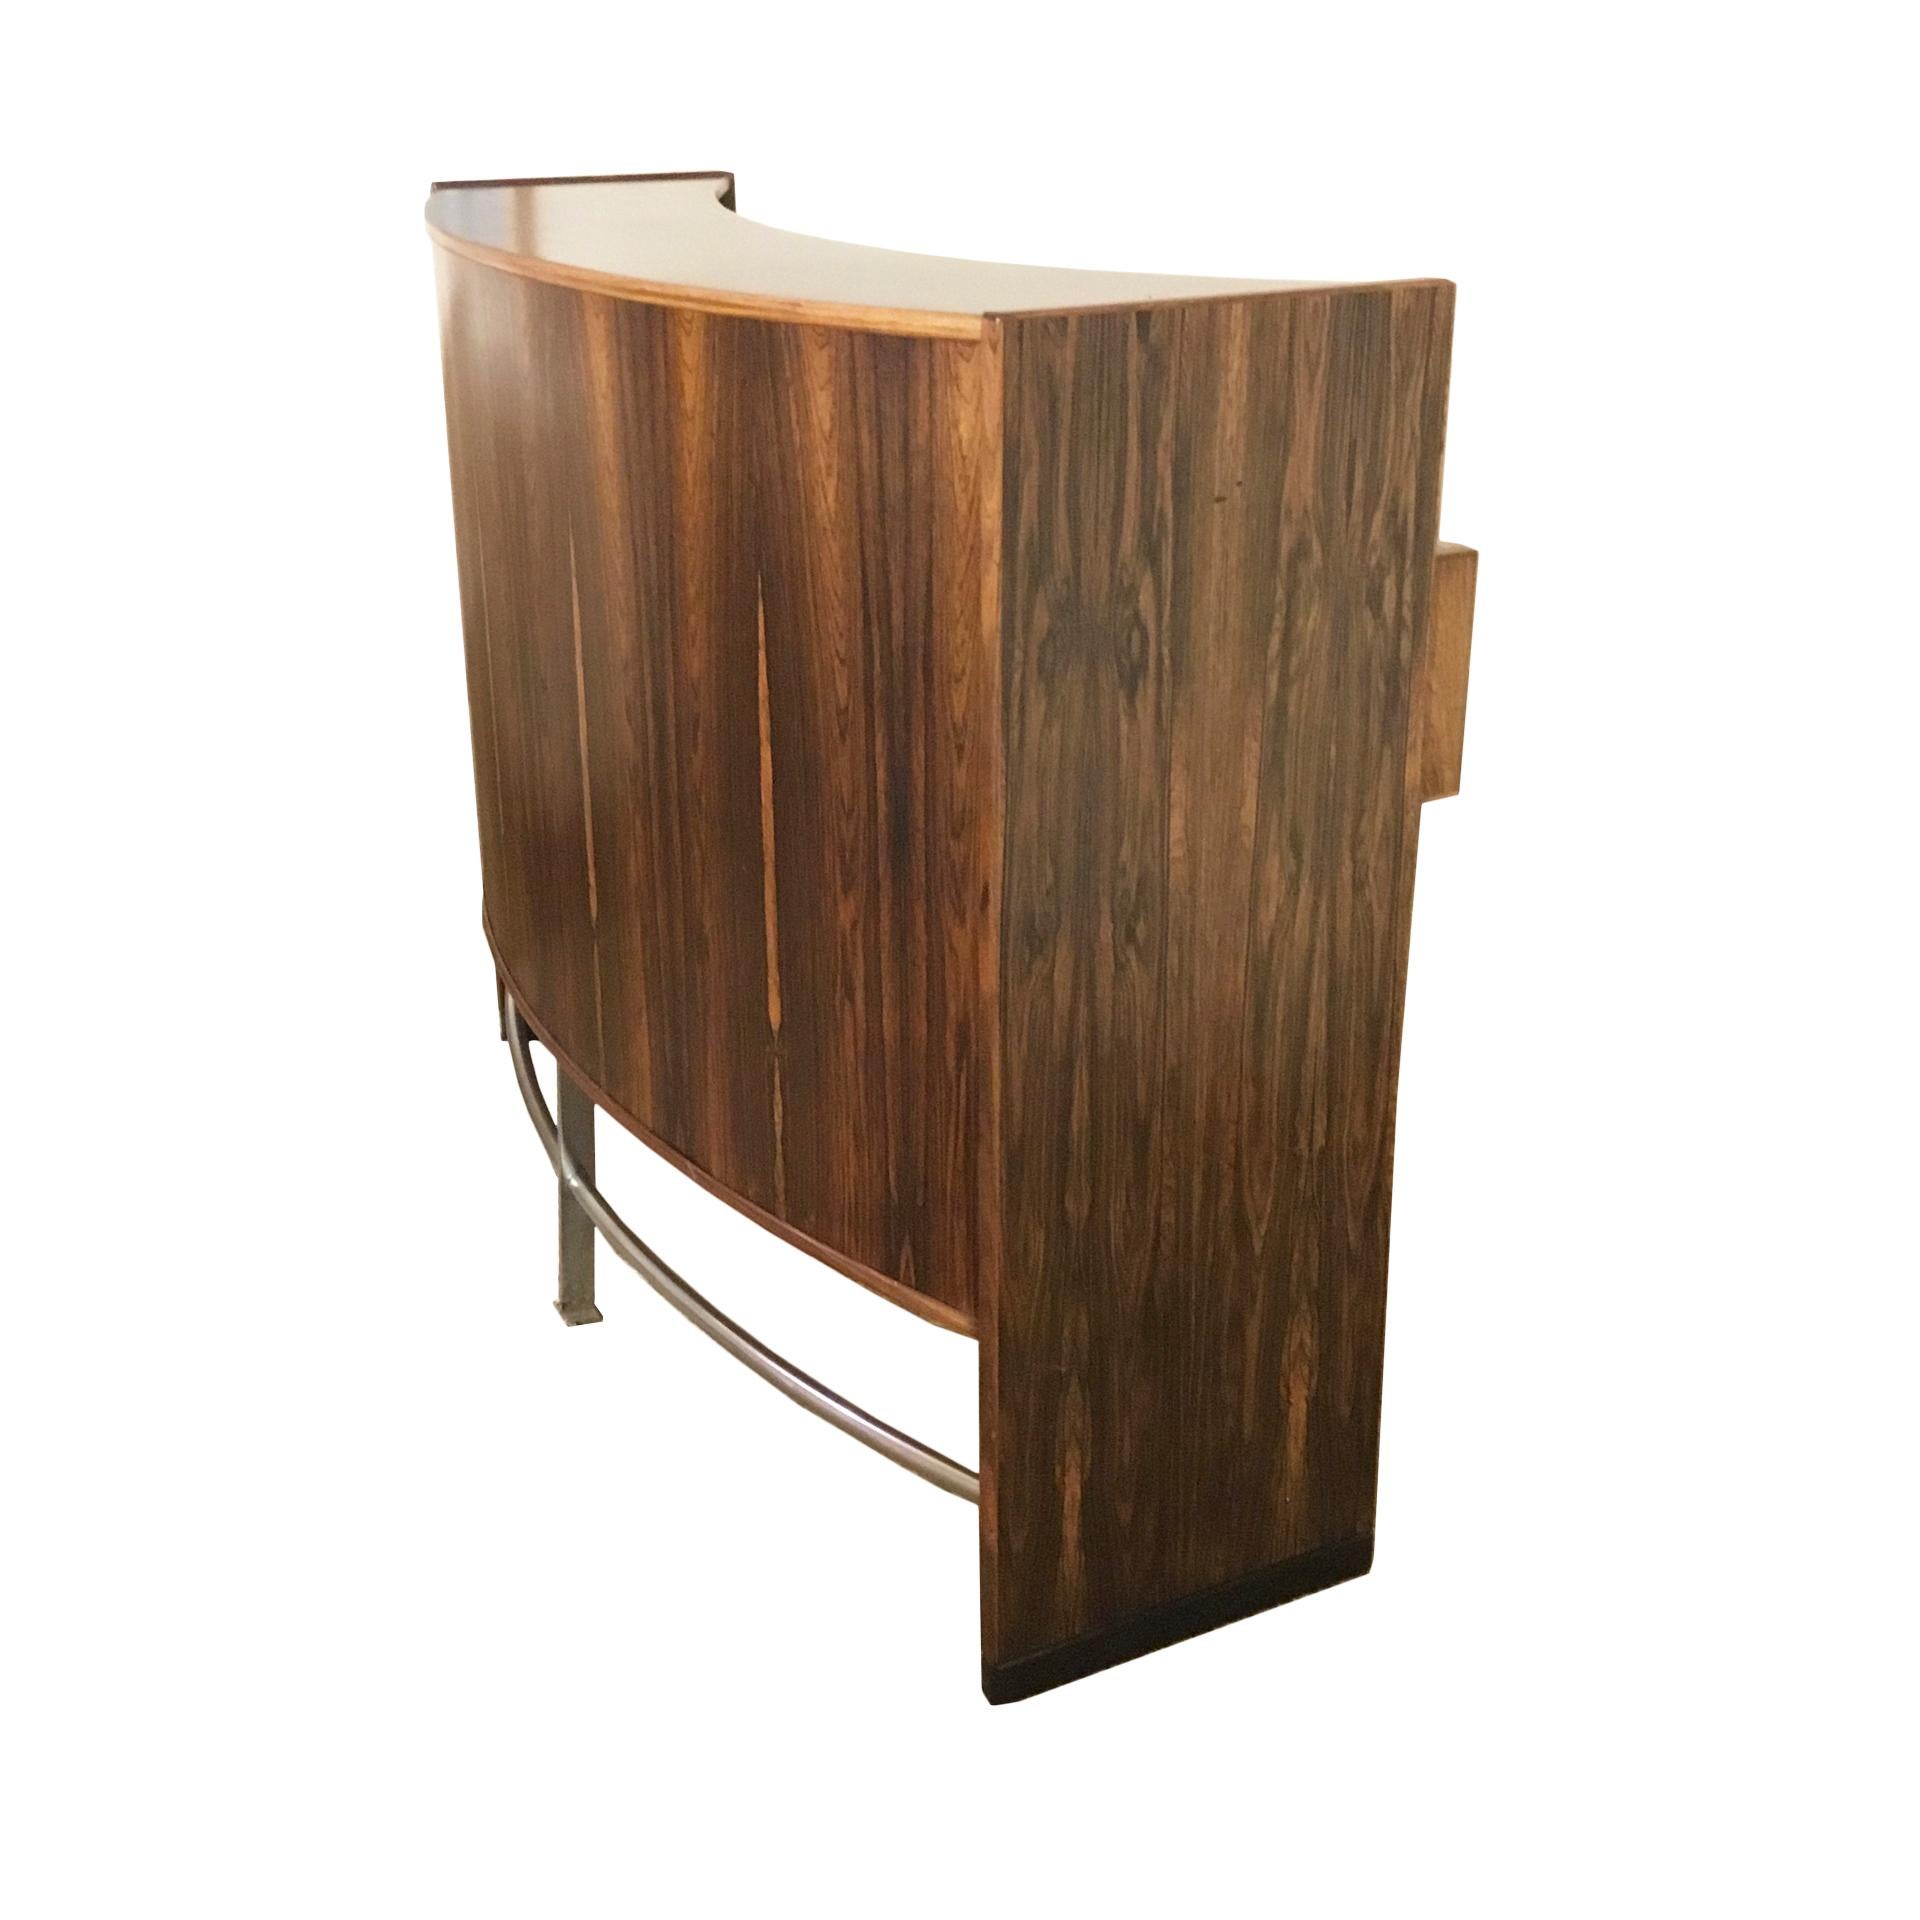 Danish bar furniture mod. Dyrlundbar designed by Erik Buch with solid wood structure covered with marquetry circles on the front and steel details. On the back 2 sliding doors and 2 drawers with chrome-plated handles. 7 curved steel bottle holders.